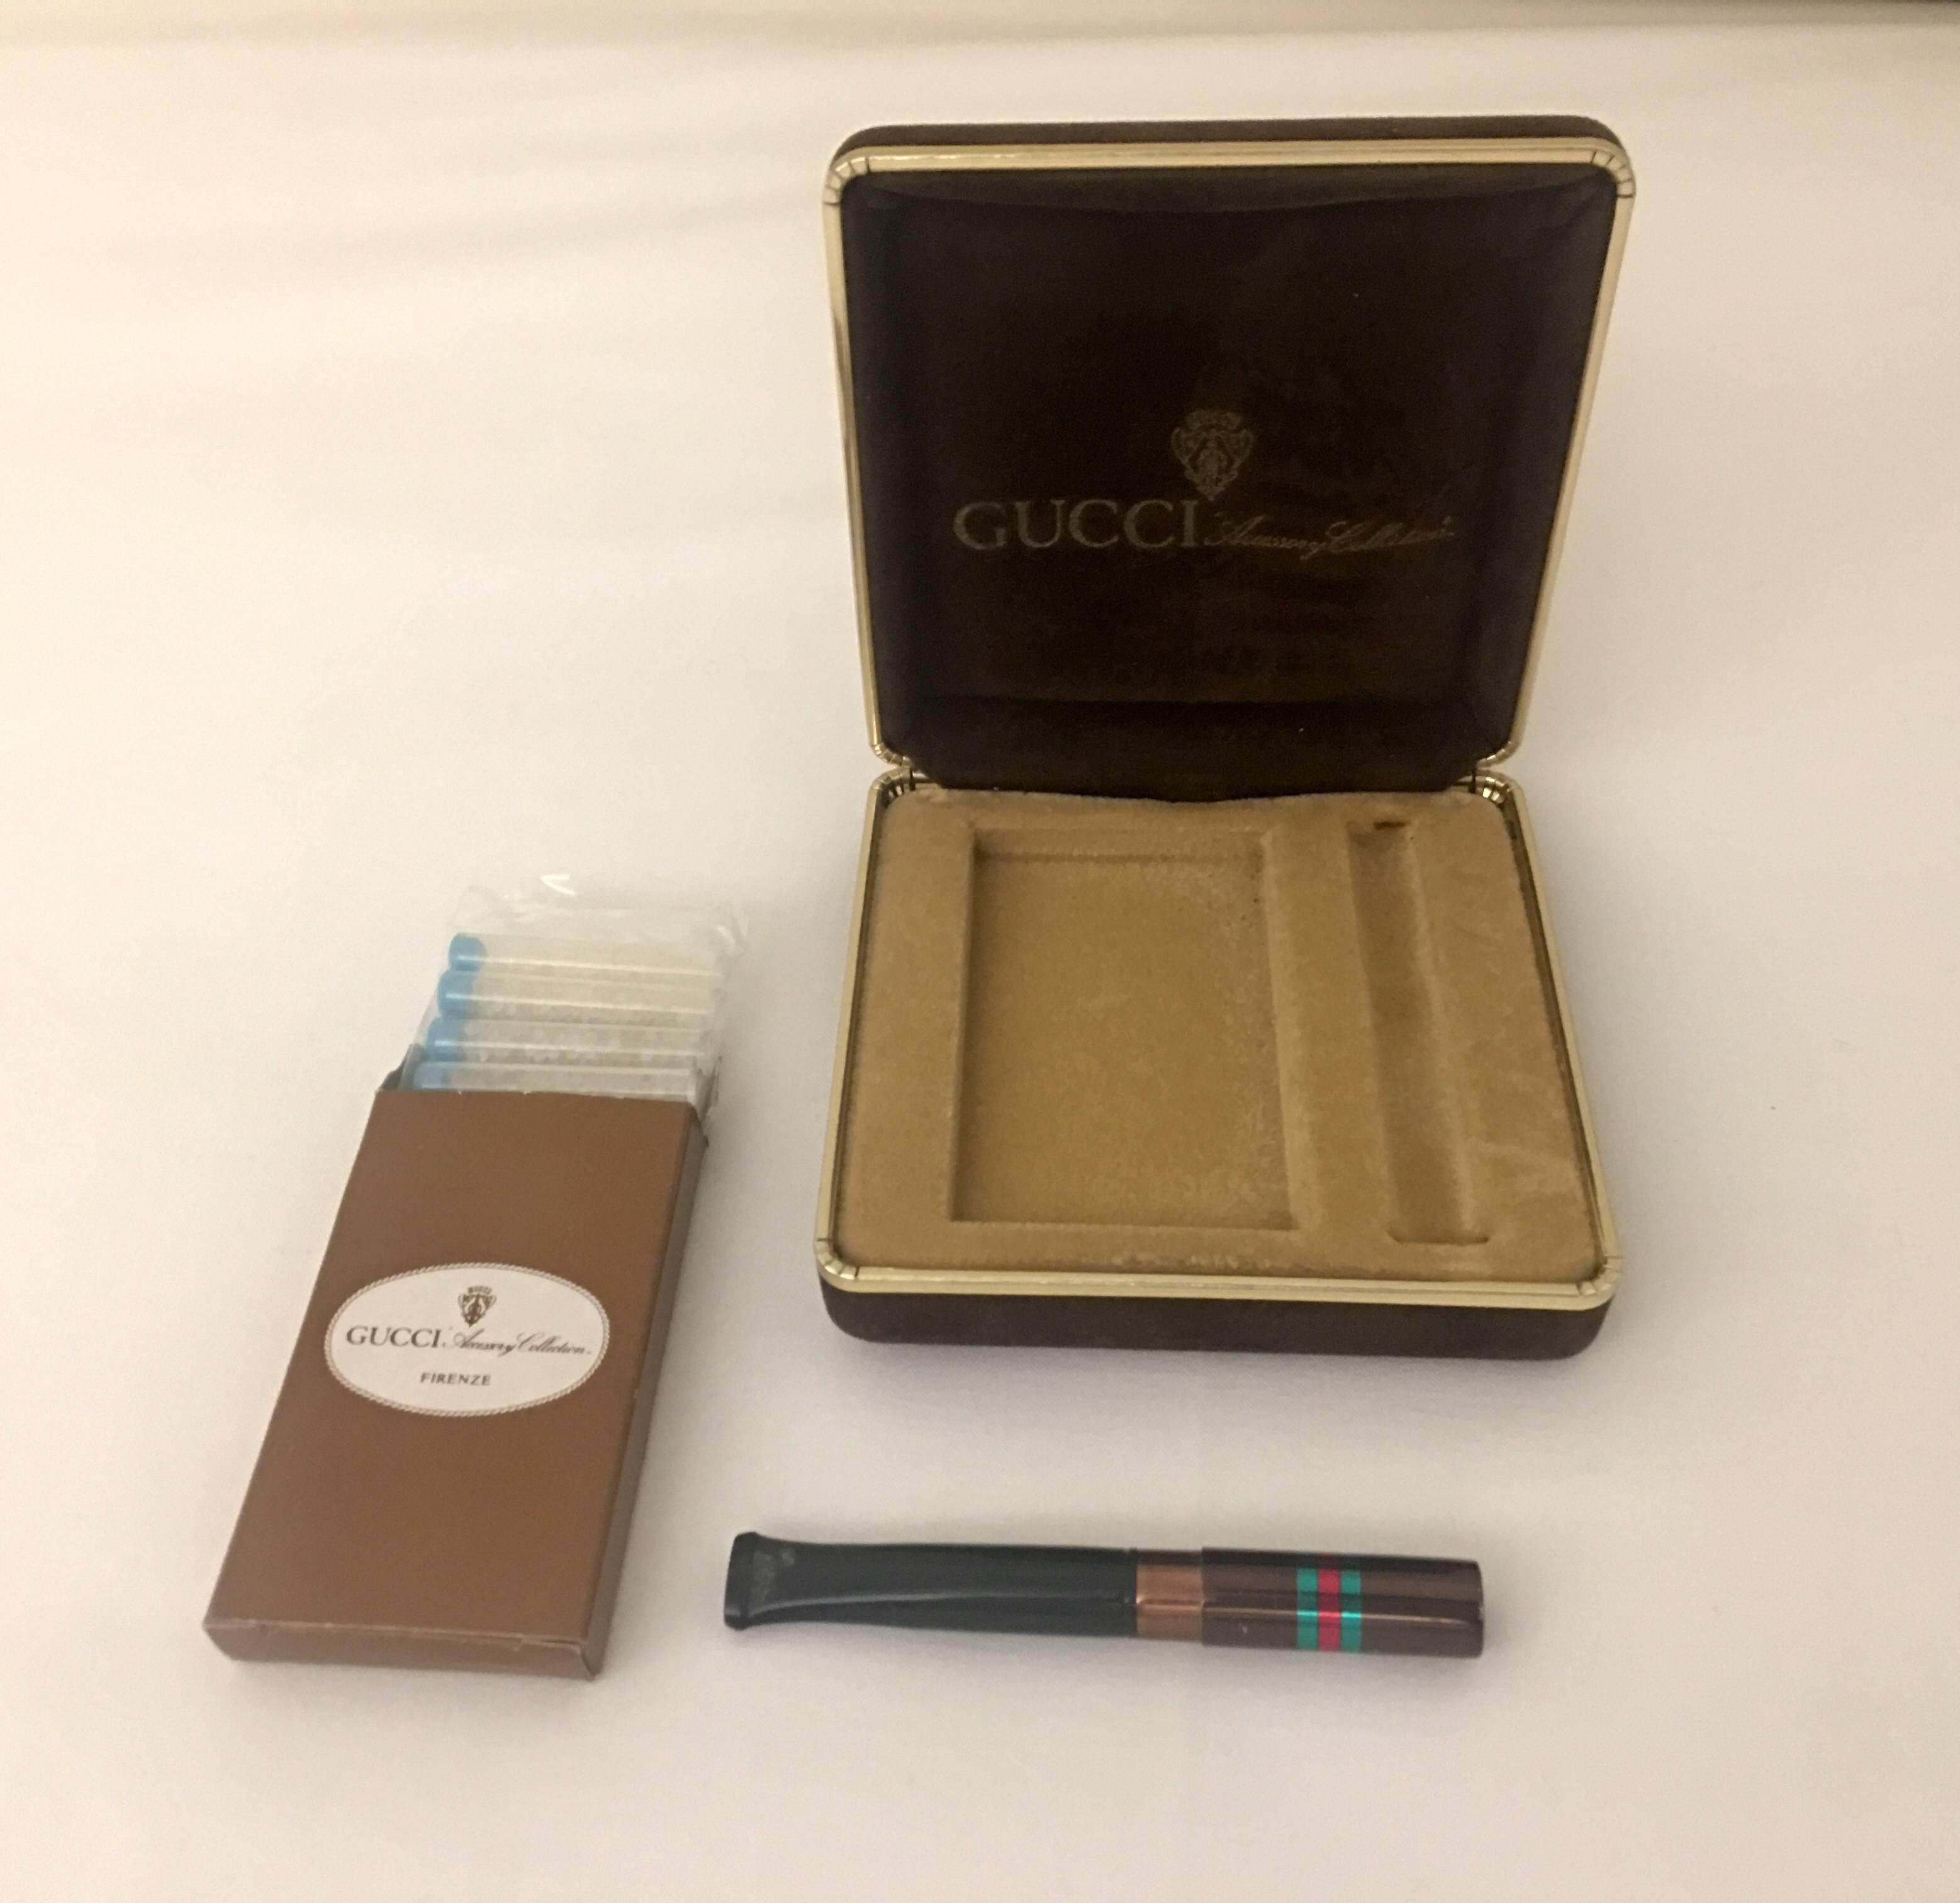 Gucci Accessory Luxury collection vintage cigarette holder with nine in the pack and original beautiful excellent condition brown Gucci box.
Very little visible sign of using the holder from the tooth.
Made in Italy.